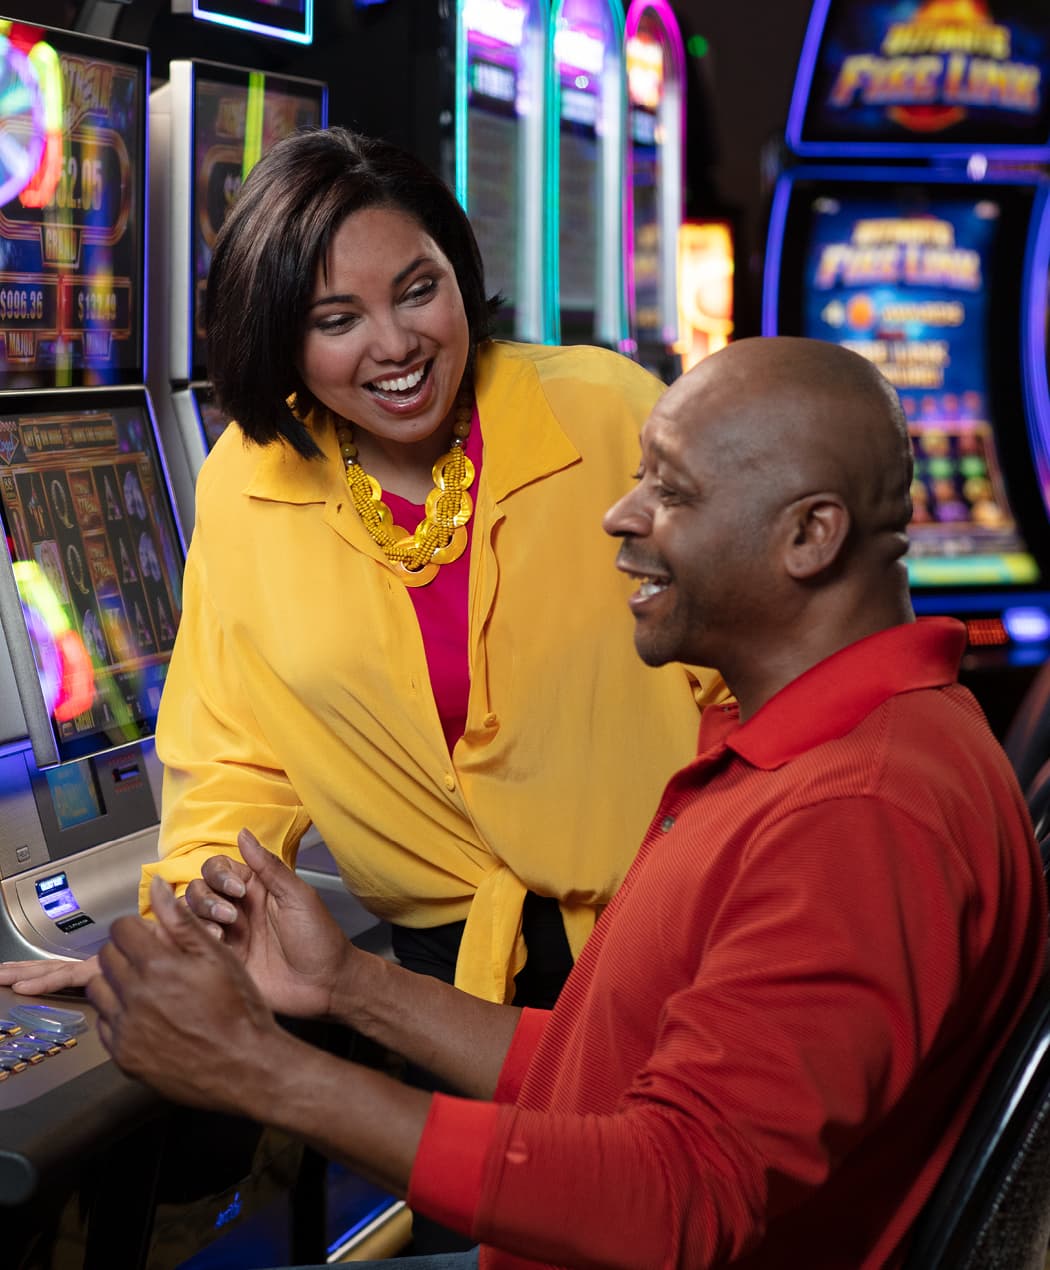 Guests hitting a win on a slot machine